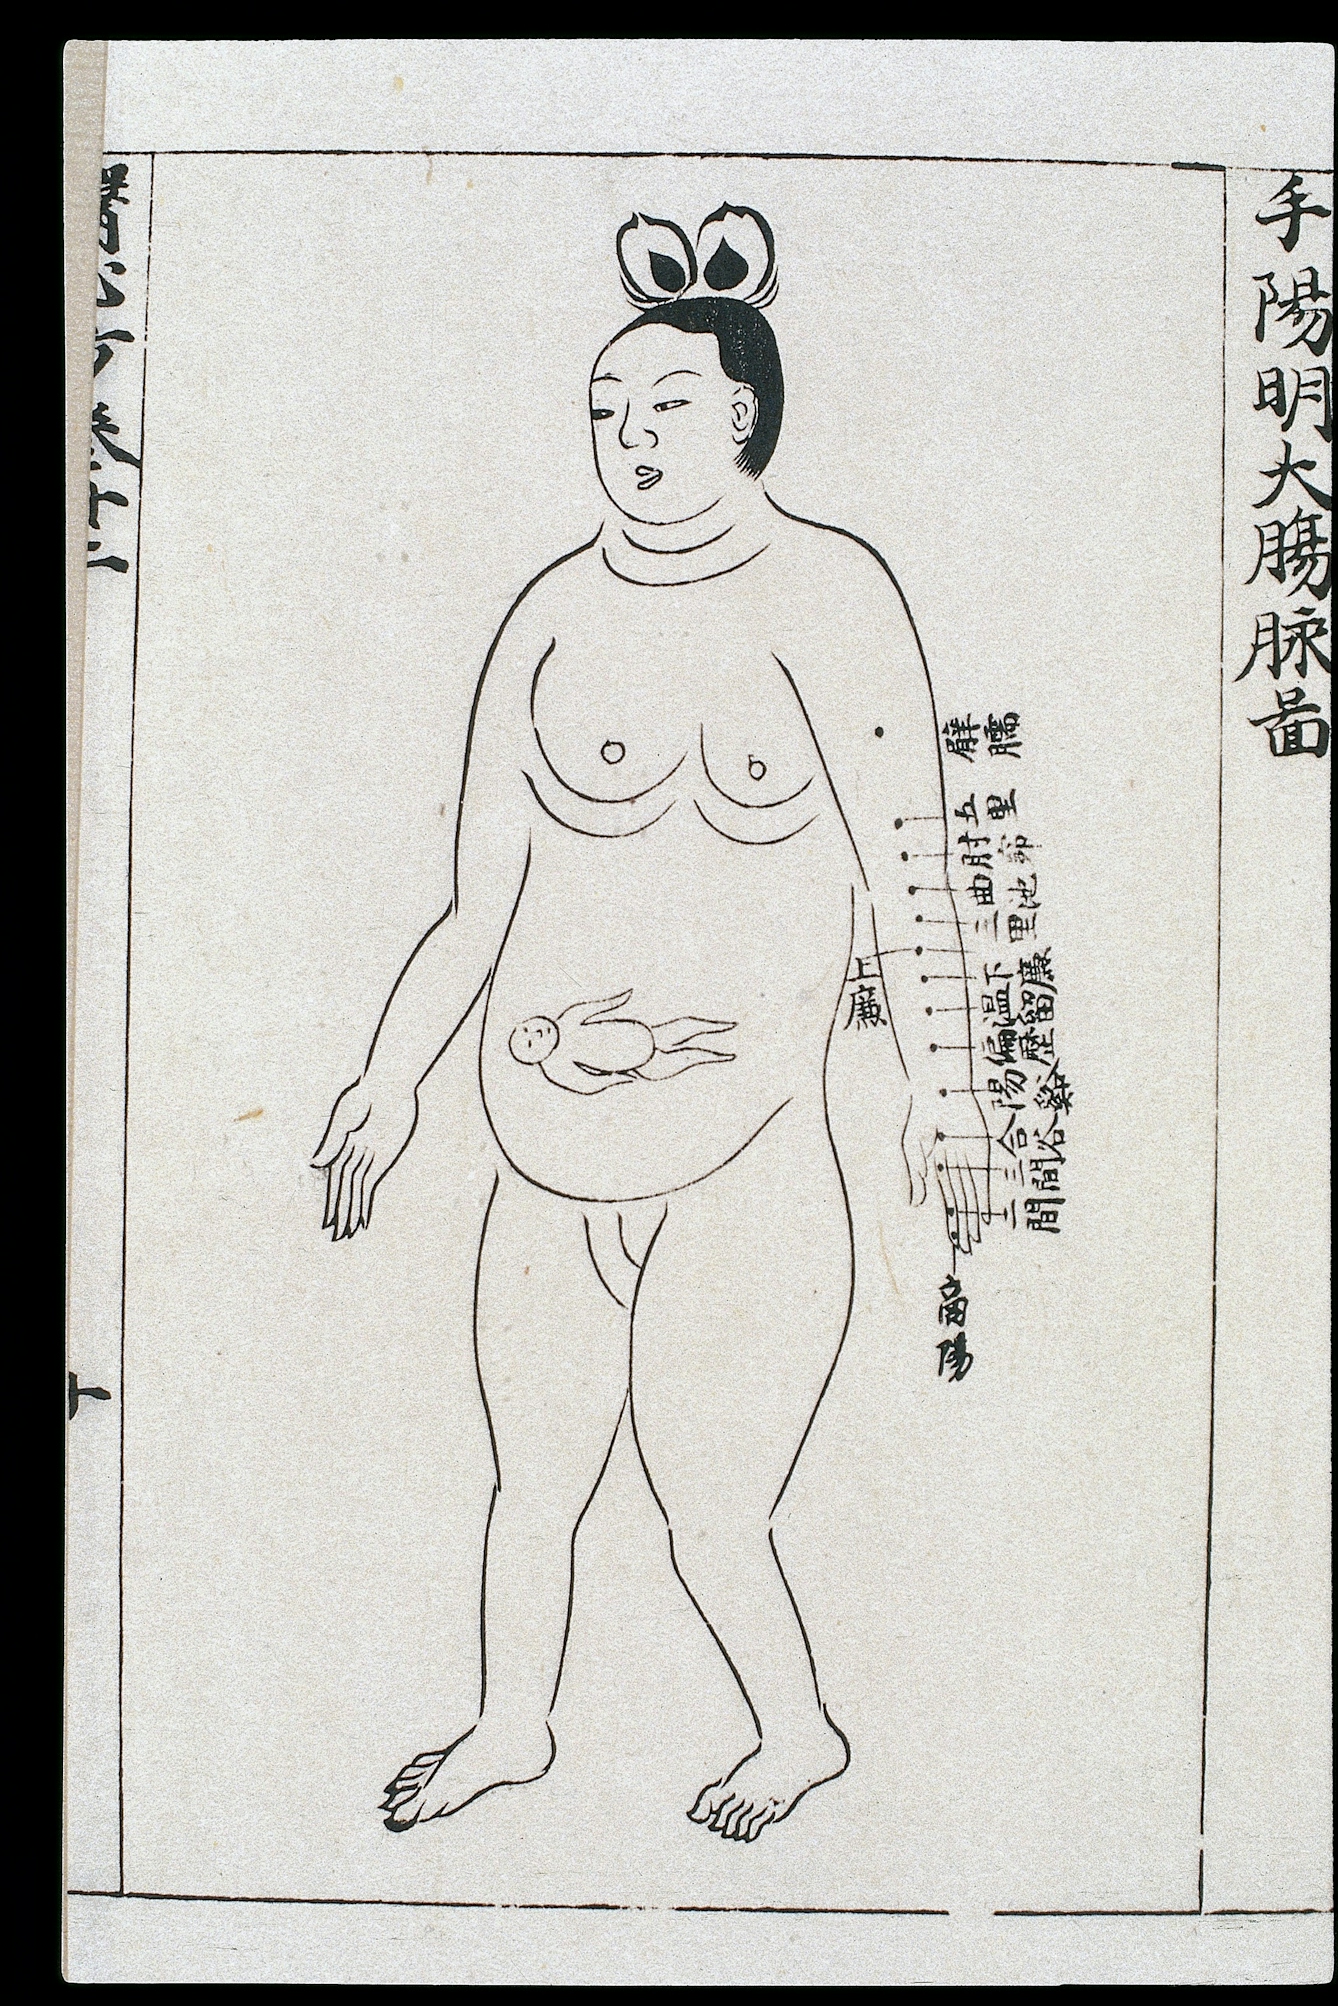 Chart showing locations on the Large Intestine channel of arm yangming where acupuncture is prohibited during the eighth month of pregnancy, from Ishinpo [Chinese: Yi xin fang] (Remedies at the Heart of Medicine), by the Japanese author Yasuyori Tanba.